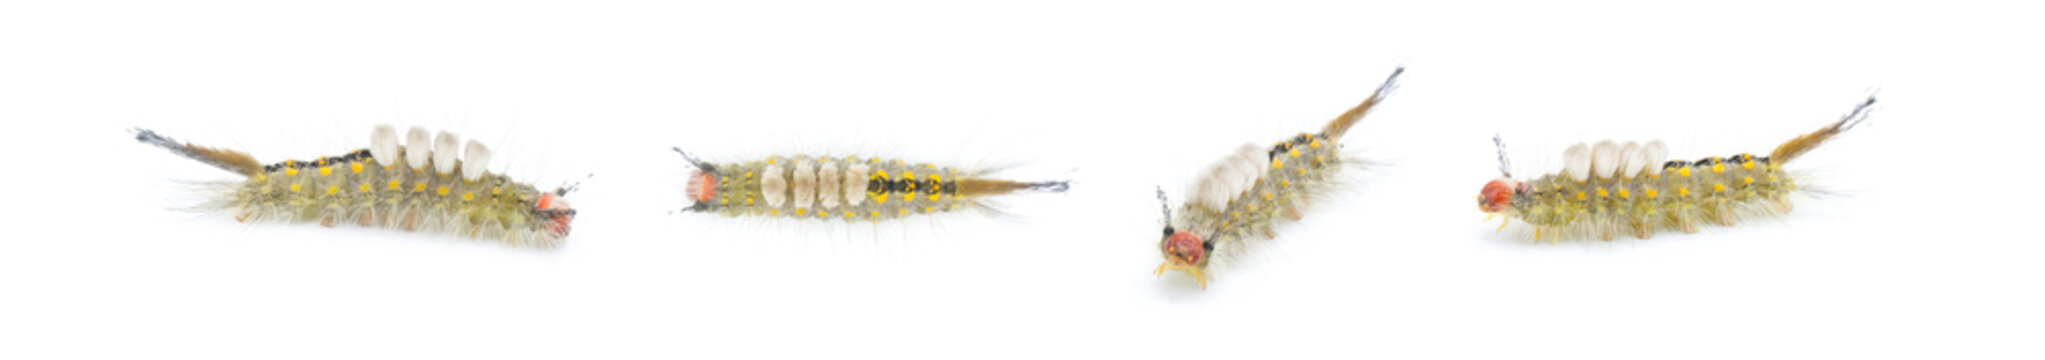 Orgyia detrita - the fir tussock or live oak tussock moth caterpillar have urticating setae hairs with antrose barbs that may cause skin irritation isolated on white background four views